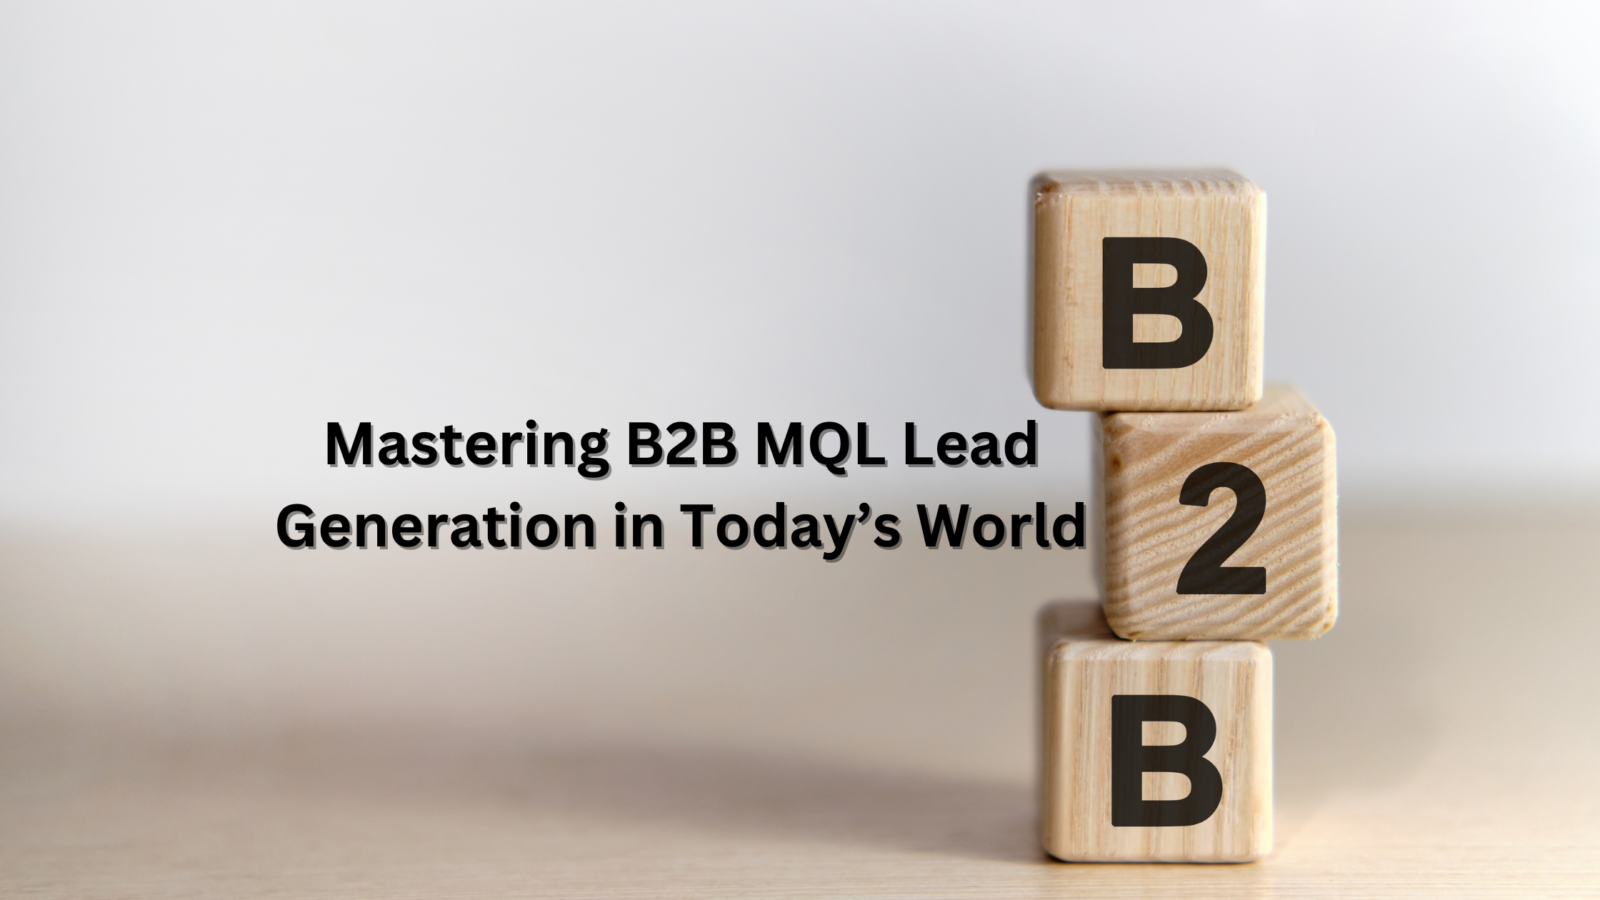 Mastering B2B MQL leads generation in today's world.